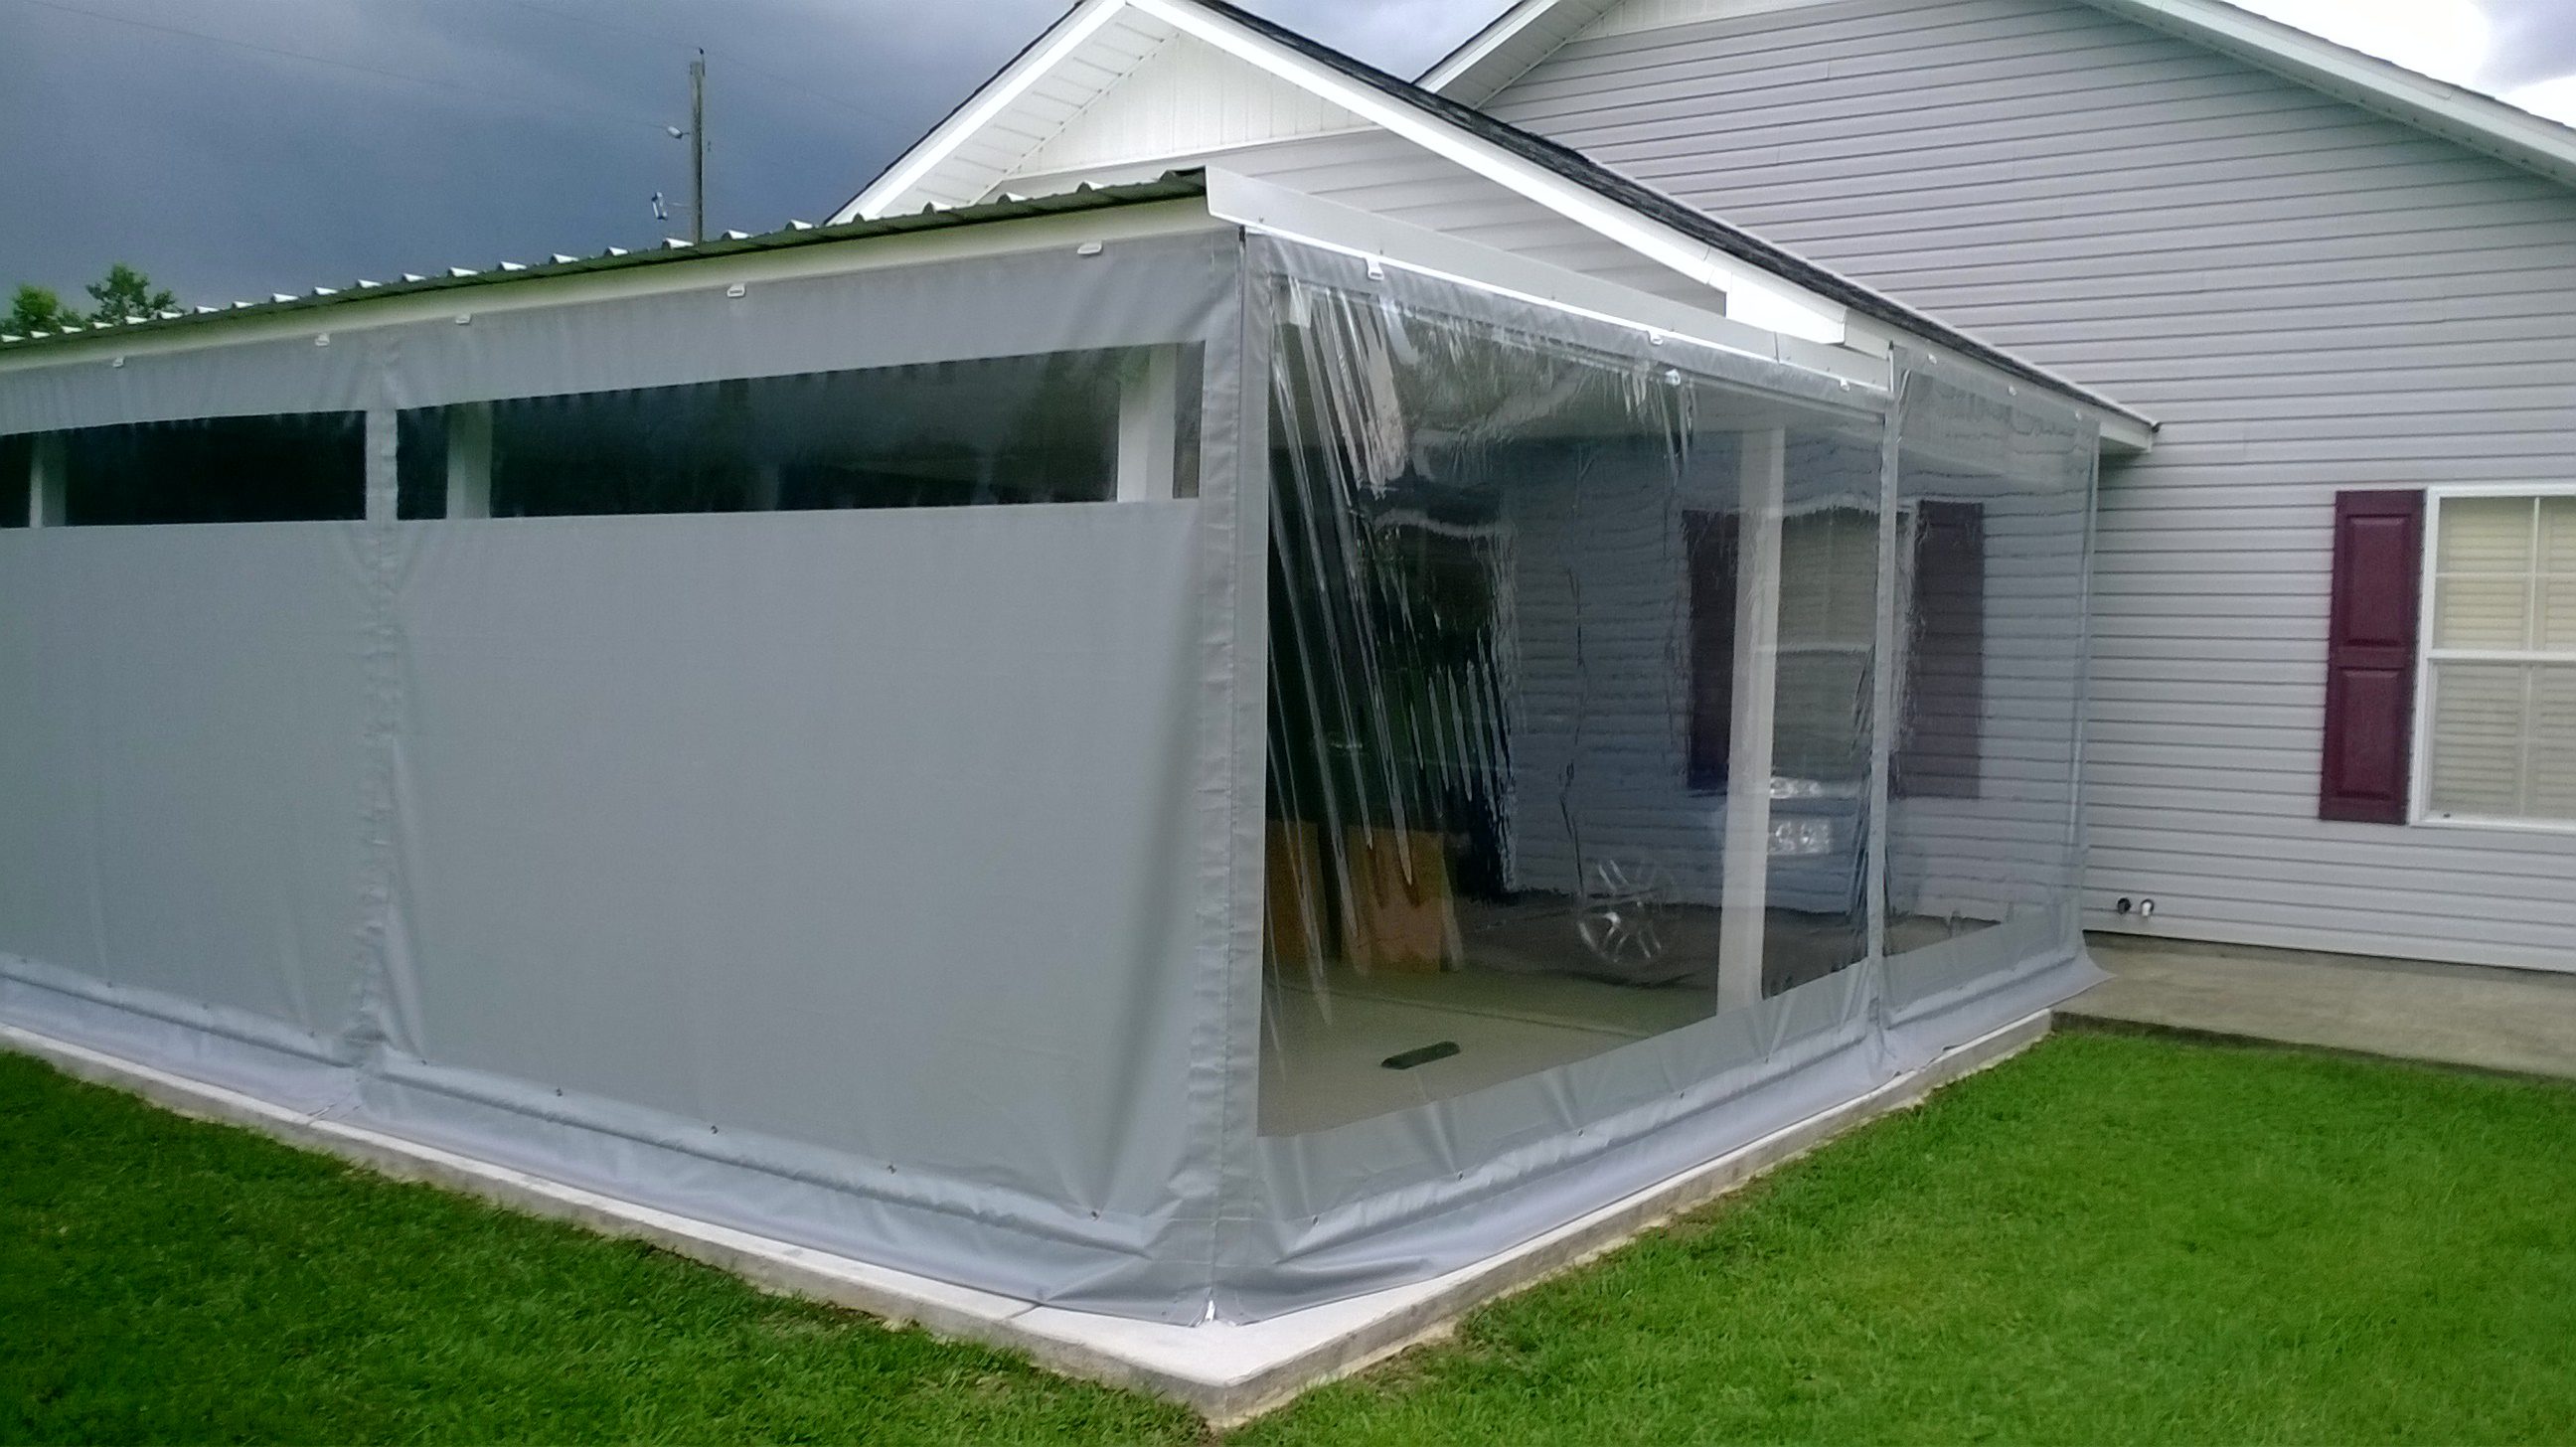 A Patio Enclosure Product Line for Any Customer in Florence, AL